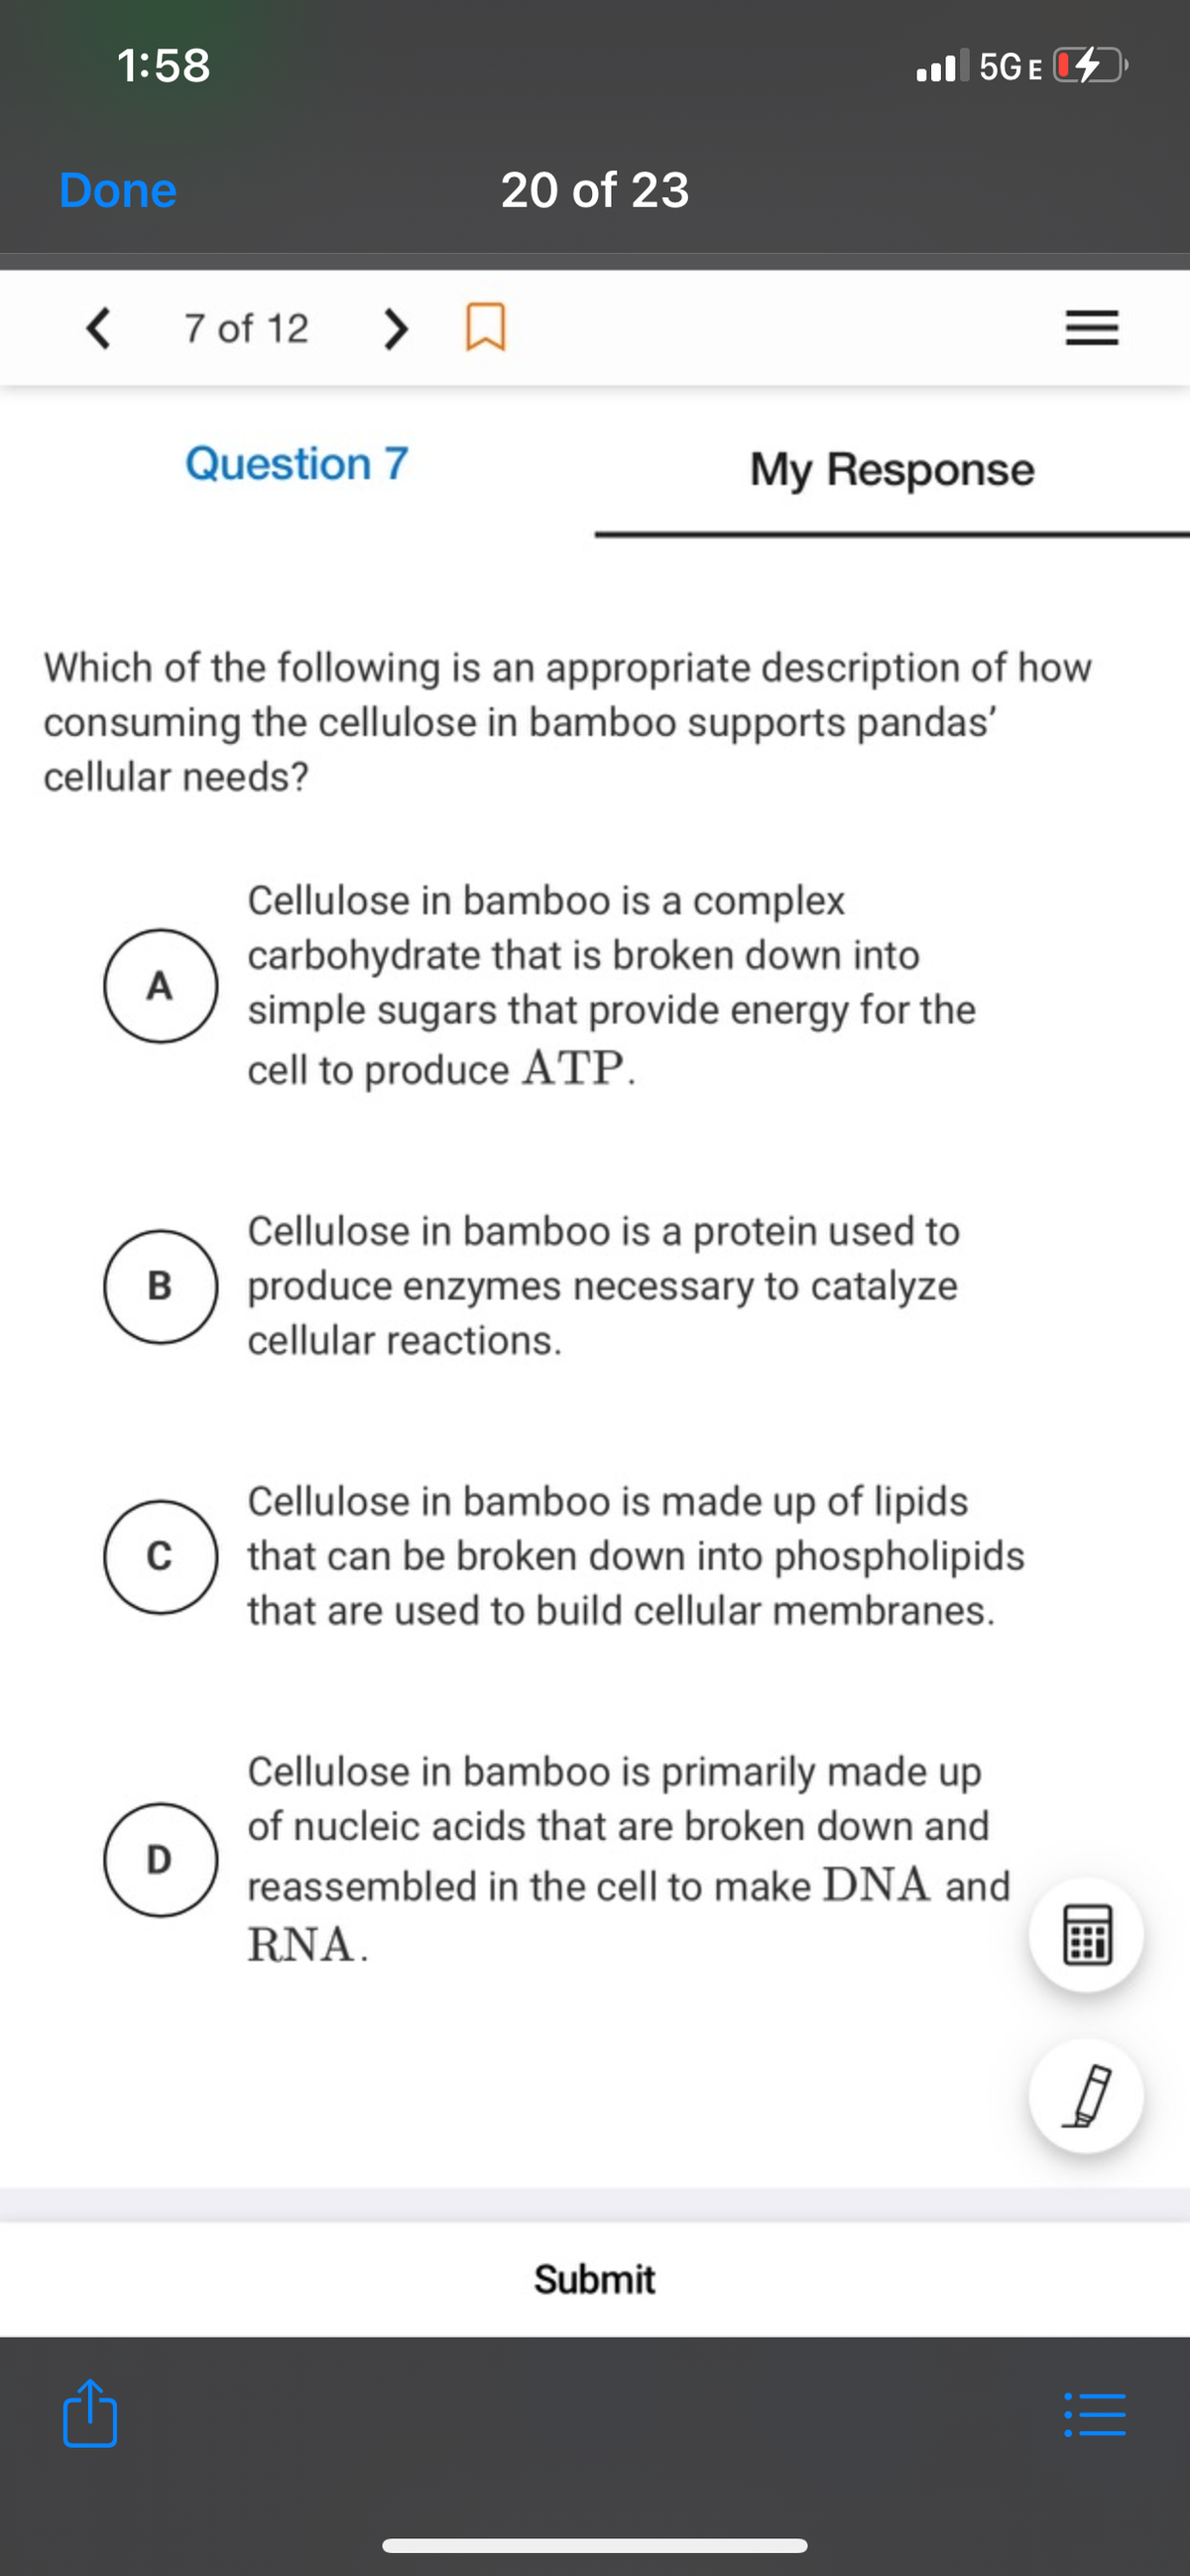 1:58
l 5GE
Done
20 of 23
7 of 12
Question 7
My Response
Which of the following is an appropriate description of how
consuming the cellulose in bamboo supports pandas'
cellular needs?
Cellulose in bamboo is a complex
carbohydrate that is broken down into
A
simple sugars that provide energy for the
cell to produce ATP.
Cellulose in bamboo is a protein used to
B
produce enzymes necessary to catalyze
cellular reactions.
Cellulose in bamboo is made up of lipids
that can be broken down into phospholipids
that are used to build cellular membranes.
Cellulose in bamboo is primarily made up
of nucleic acids that are broken down and
D
reassembled in the cell to make DNA and
RNA.
Submit
II
